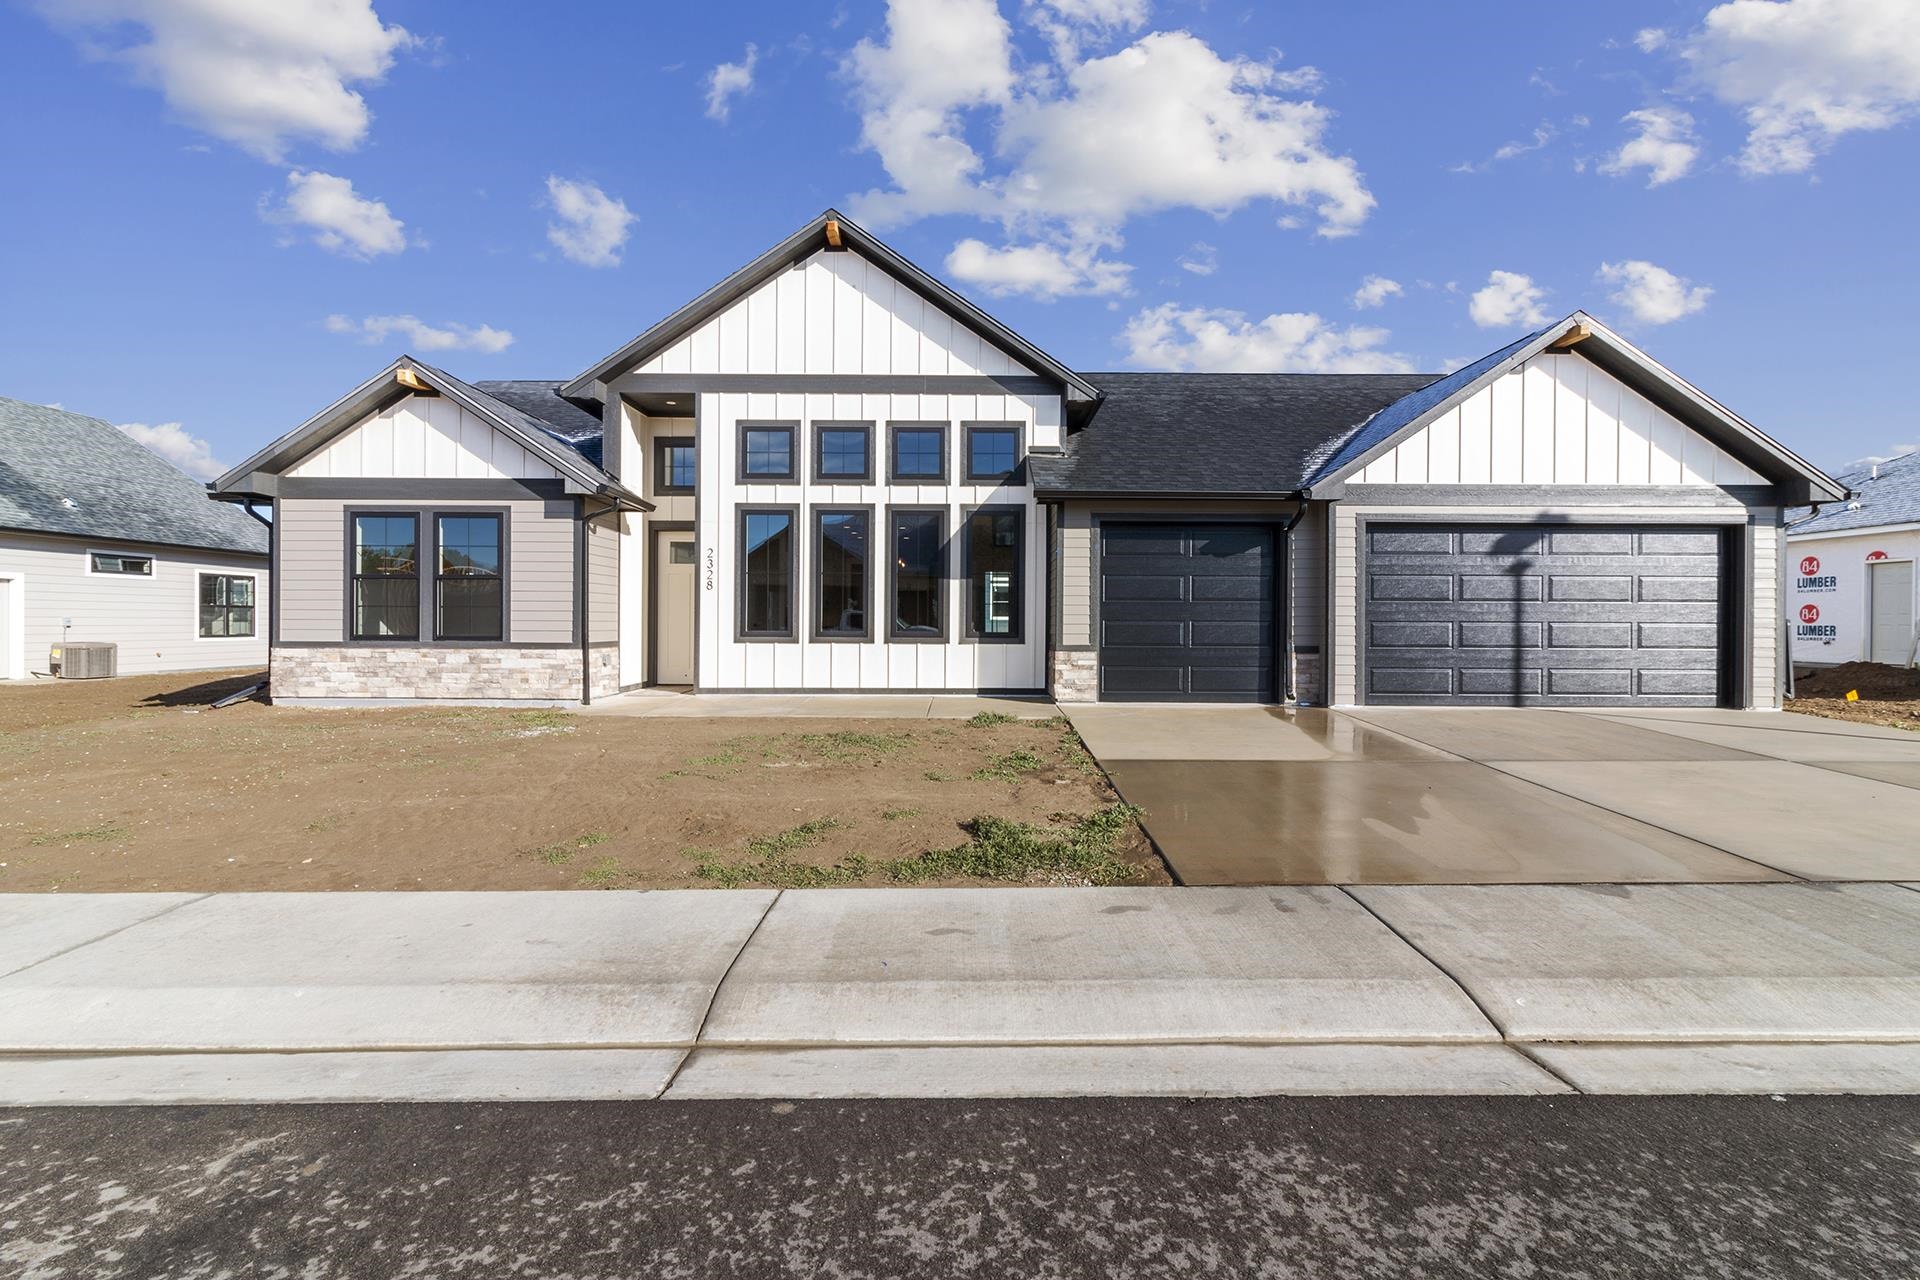 NEW CONSTRUCTION by TreyTyn Homes in Northwest Grand Junction's county-chic subdivision, Silver Spur! This sprawling + functional floorplan has every desirable feature and is sure to WOW! for years to come! A grand front entrance is accented by rows of large picture windows that let plenty of natural sunlight in and create charming curb appeal. The entry leads you into the large open living room with access to three guest/additional bedrooms on the west side of the home. Front bedroom can be used as office/flex space, if desired, and is adjacent to the full bathroom, complete with tile-surround walk-in shower. The two bedrooms on the northwest side of the home share a jack-and-jill bathroom, with dual vanities and tile-surround tub/shower combo. Chef's kitchen offers plenty of upgraded cabinetry, granite countertops, large center island, spacious pantry for plenty of additional storage space and eat-in dining room space -- enjoy the large open space for entertaining guests for years to come! Full appliance package with REFRIGERATOR included! Split-floor plan puts the primary suite secluded on the east side of the home and features a spa-like en-suite bathroom with dual vanities, walk-in shower and private lavatory. Oversized walk-in closet has convenient walk-through access to the laundry room, which can be closed off from the mud room entrance through the garage for additional privacy! Large backyard to enjoy incredible Grand Valley views from the covered patio and plenty of RV parking space! FULL PRIVACY FENCING AND FRONT LANDSCAPING installed by Builder!  Located in the HIGHLY desired Appleton/Fruita school district and conveniently located near area shopping, restaurants and entertainment! MUST SEE this spectacular property TODAY!